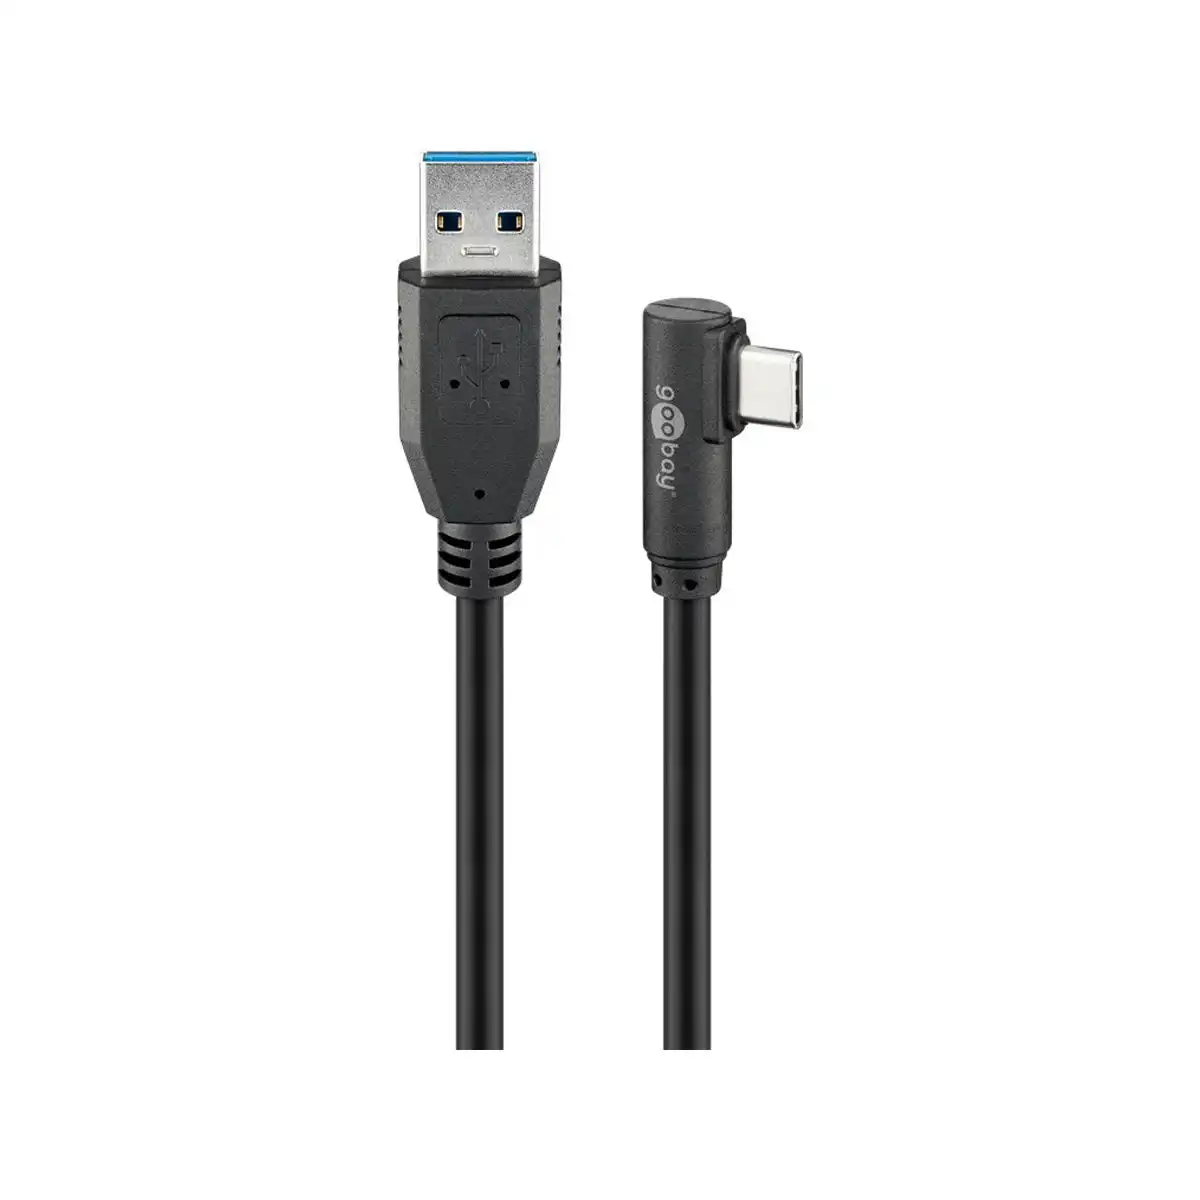 Goobay USB-C to USB A 3.0 Cable 0.5M for Mobiles - Black